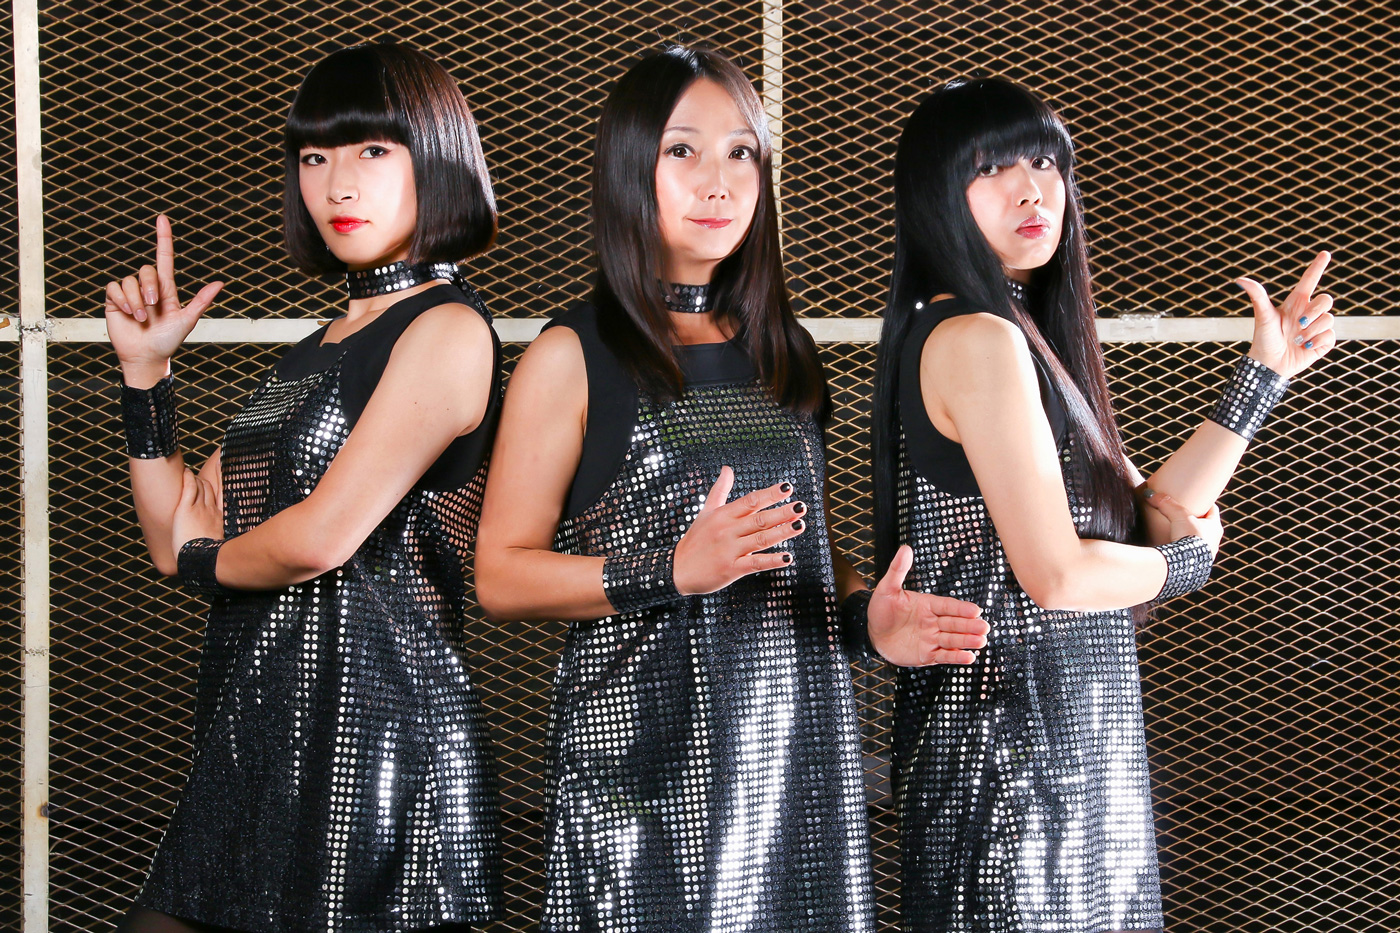 Shonen Knife – the most lovable punk band on the planet